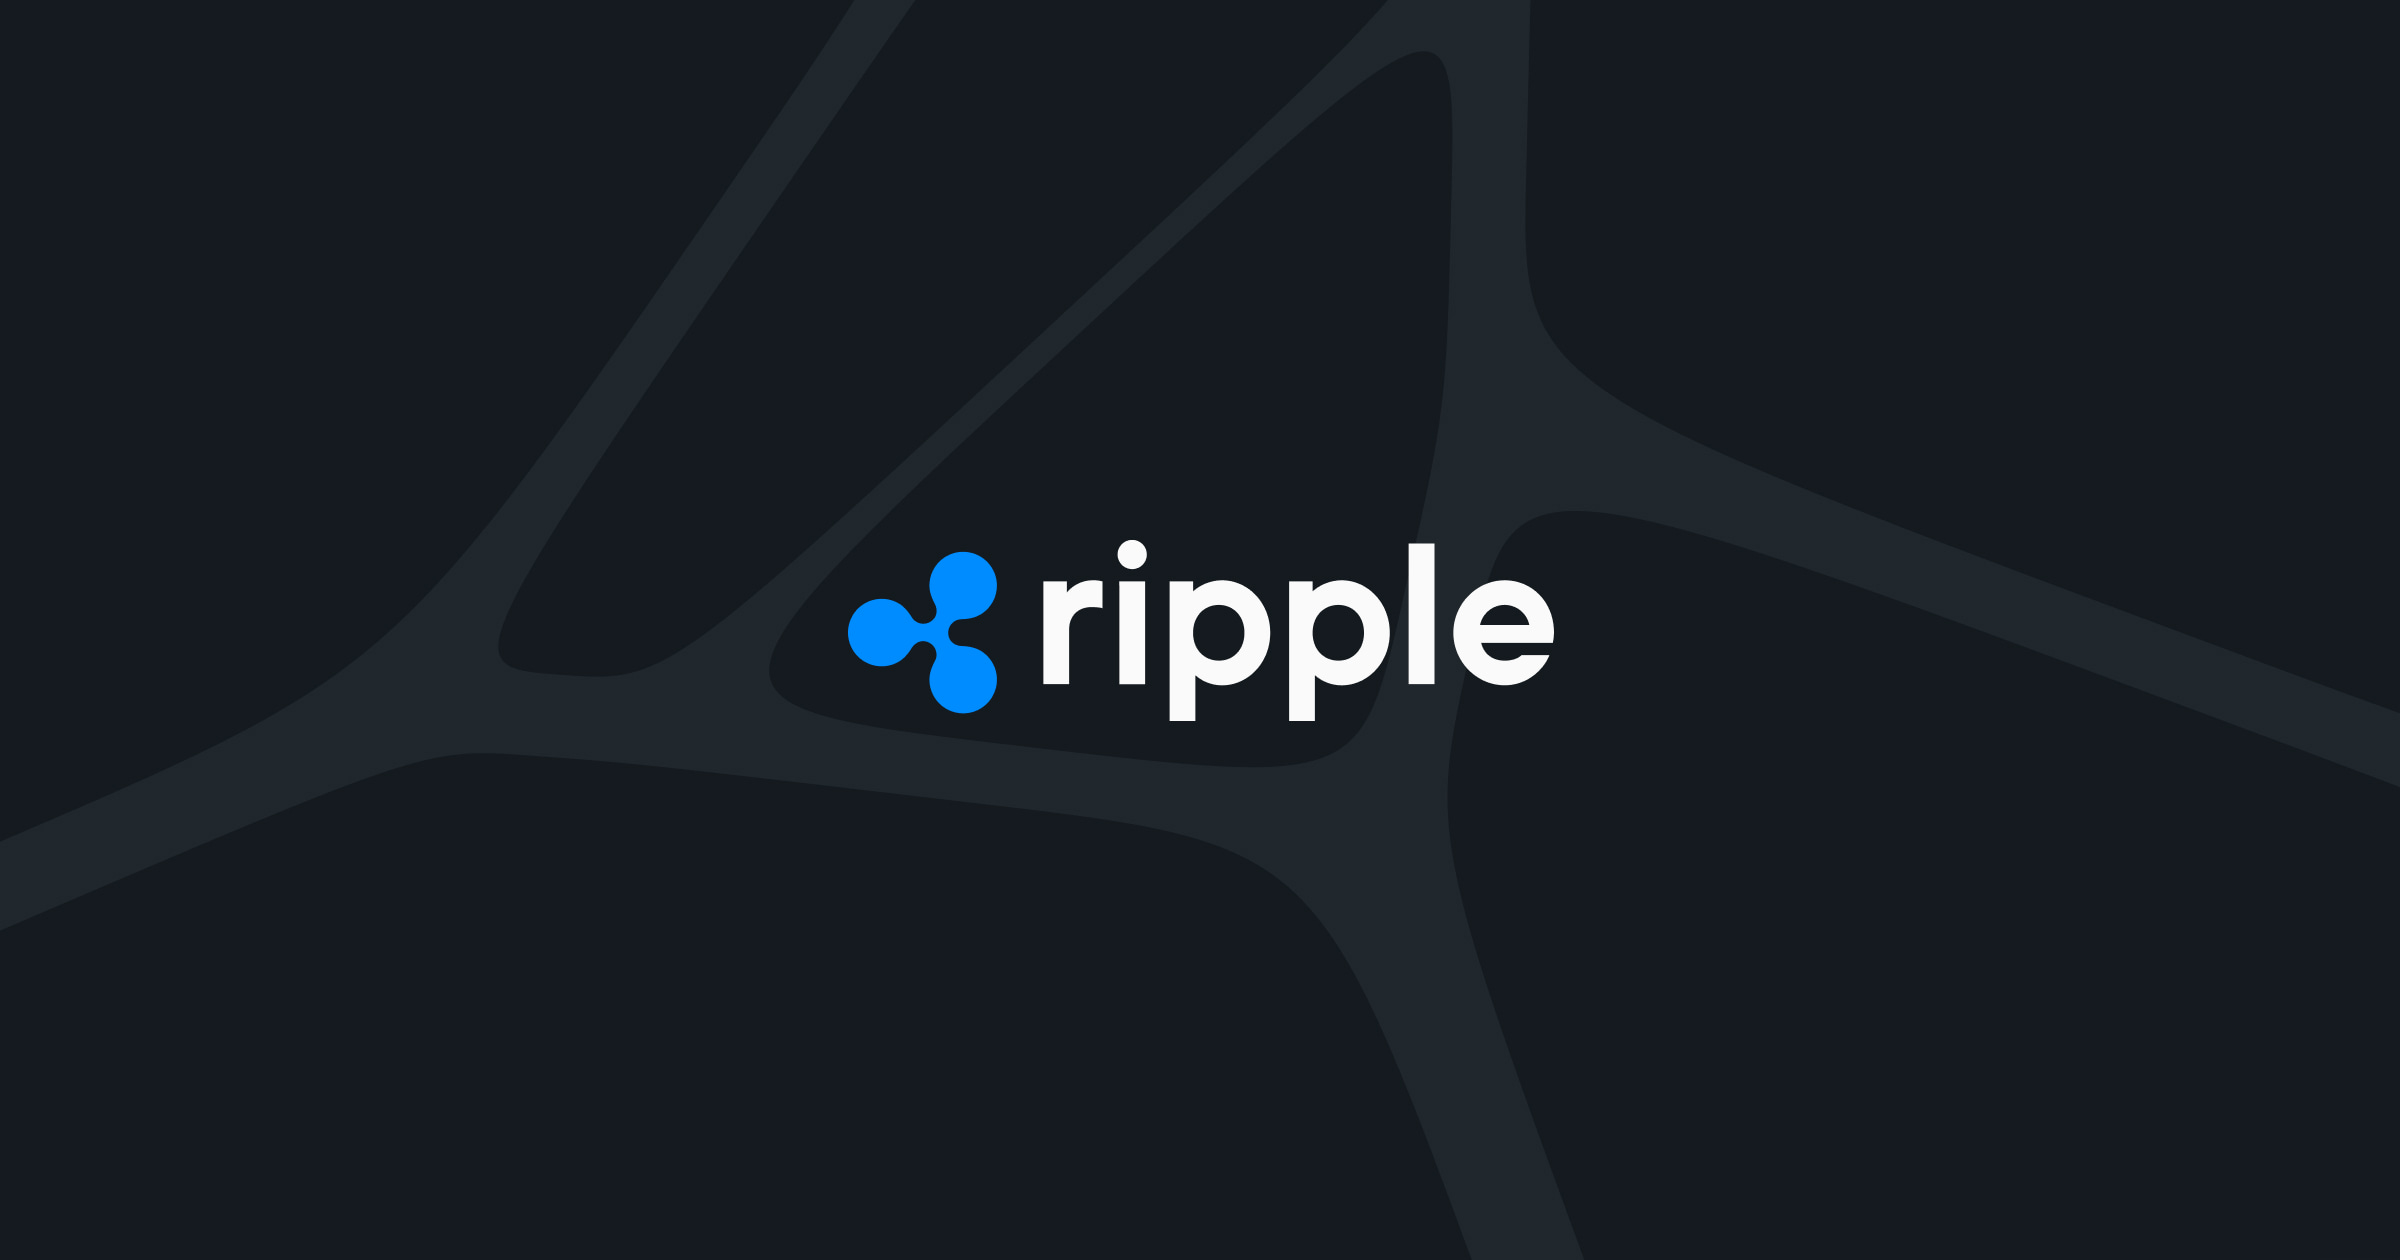 ripple-expands-on-demand-liquidity-to-nearly-40-payout-markets-adds-machine-learning-capabilities-or-ripple